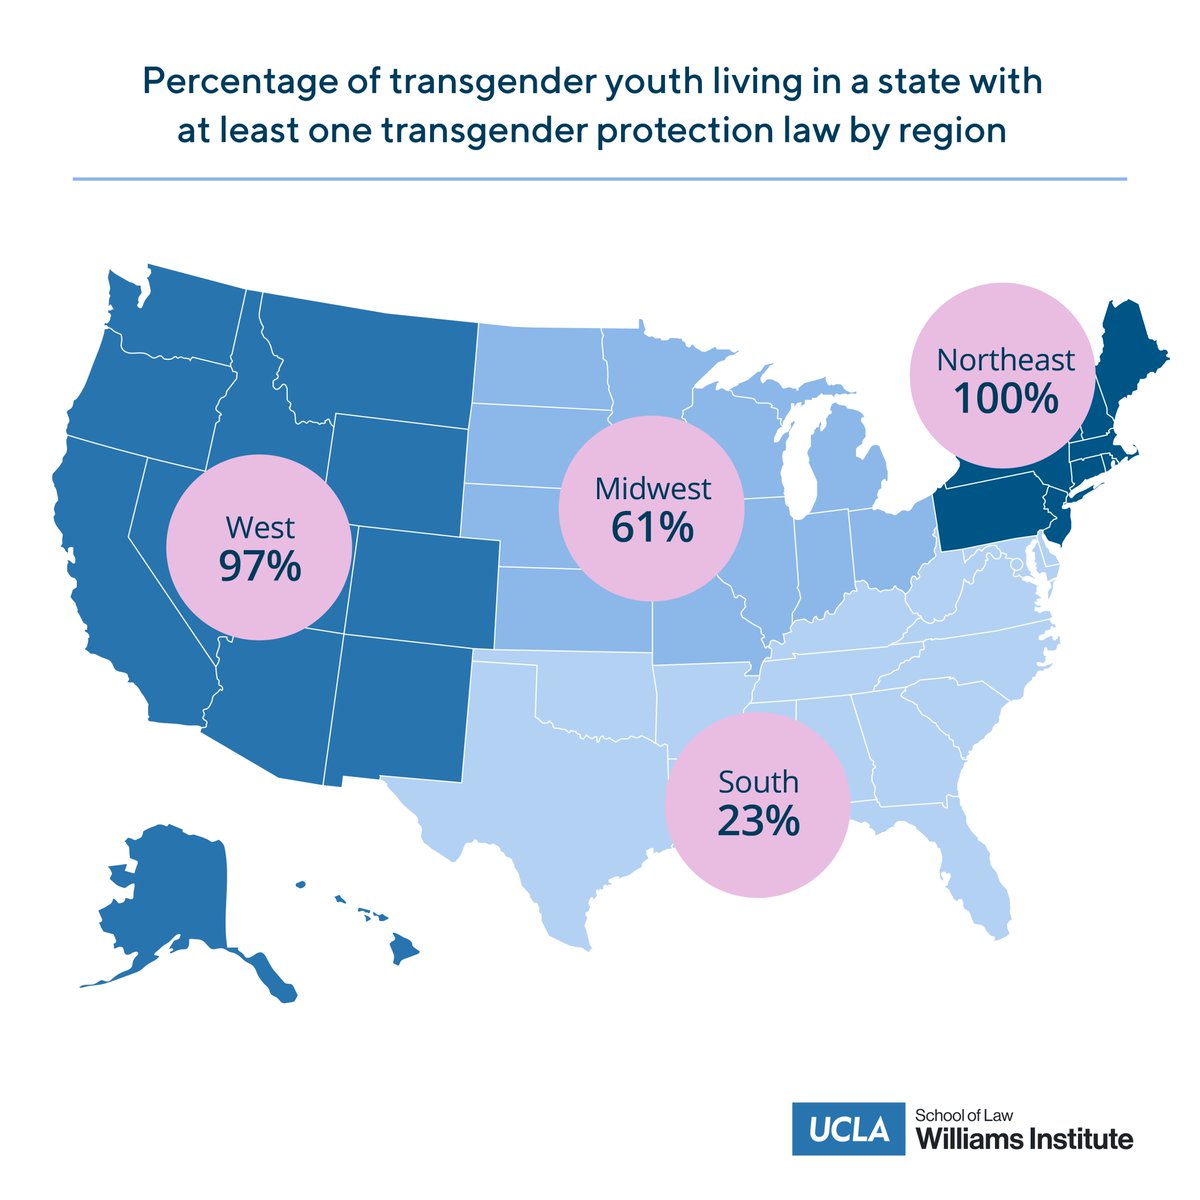 On #TransDayOfVisibility, some good news. All transgender youth in the Northeast live in a state that has a law protecting their access to gender-affirming care, a ban on conversion therapy, or both.